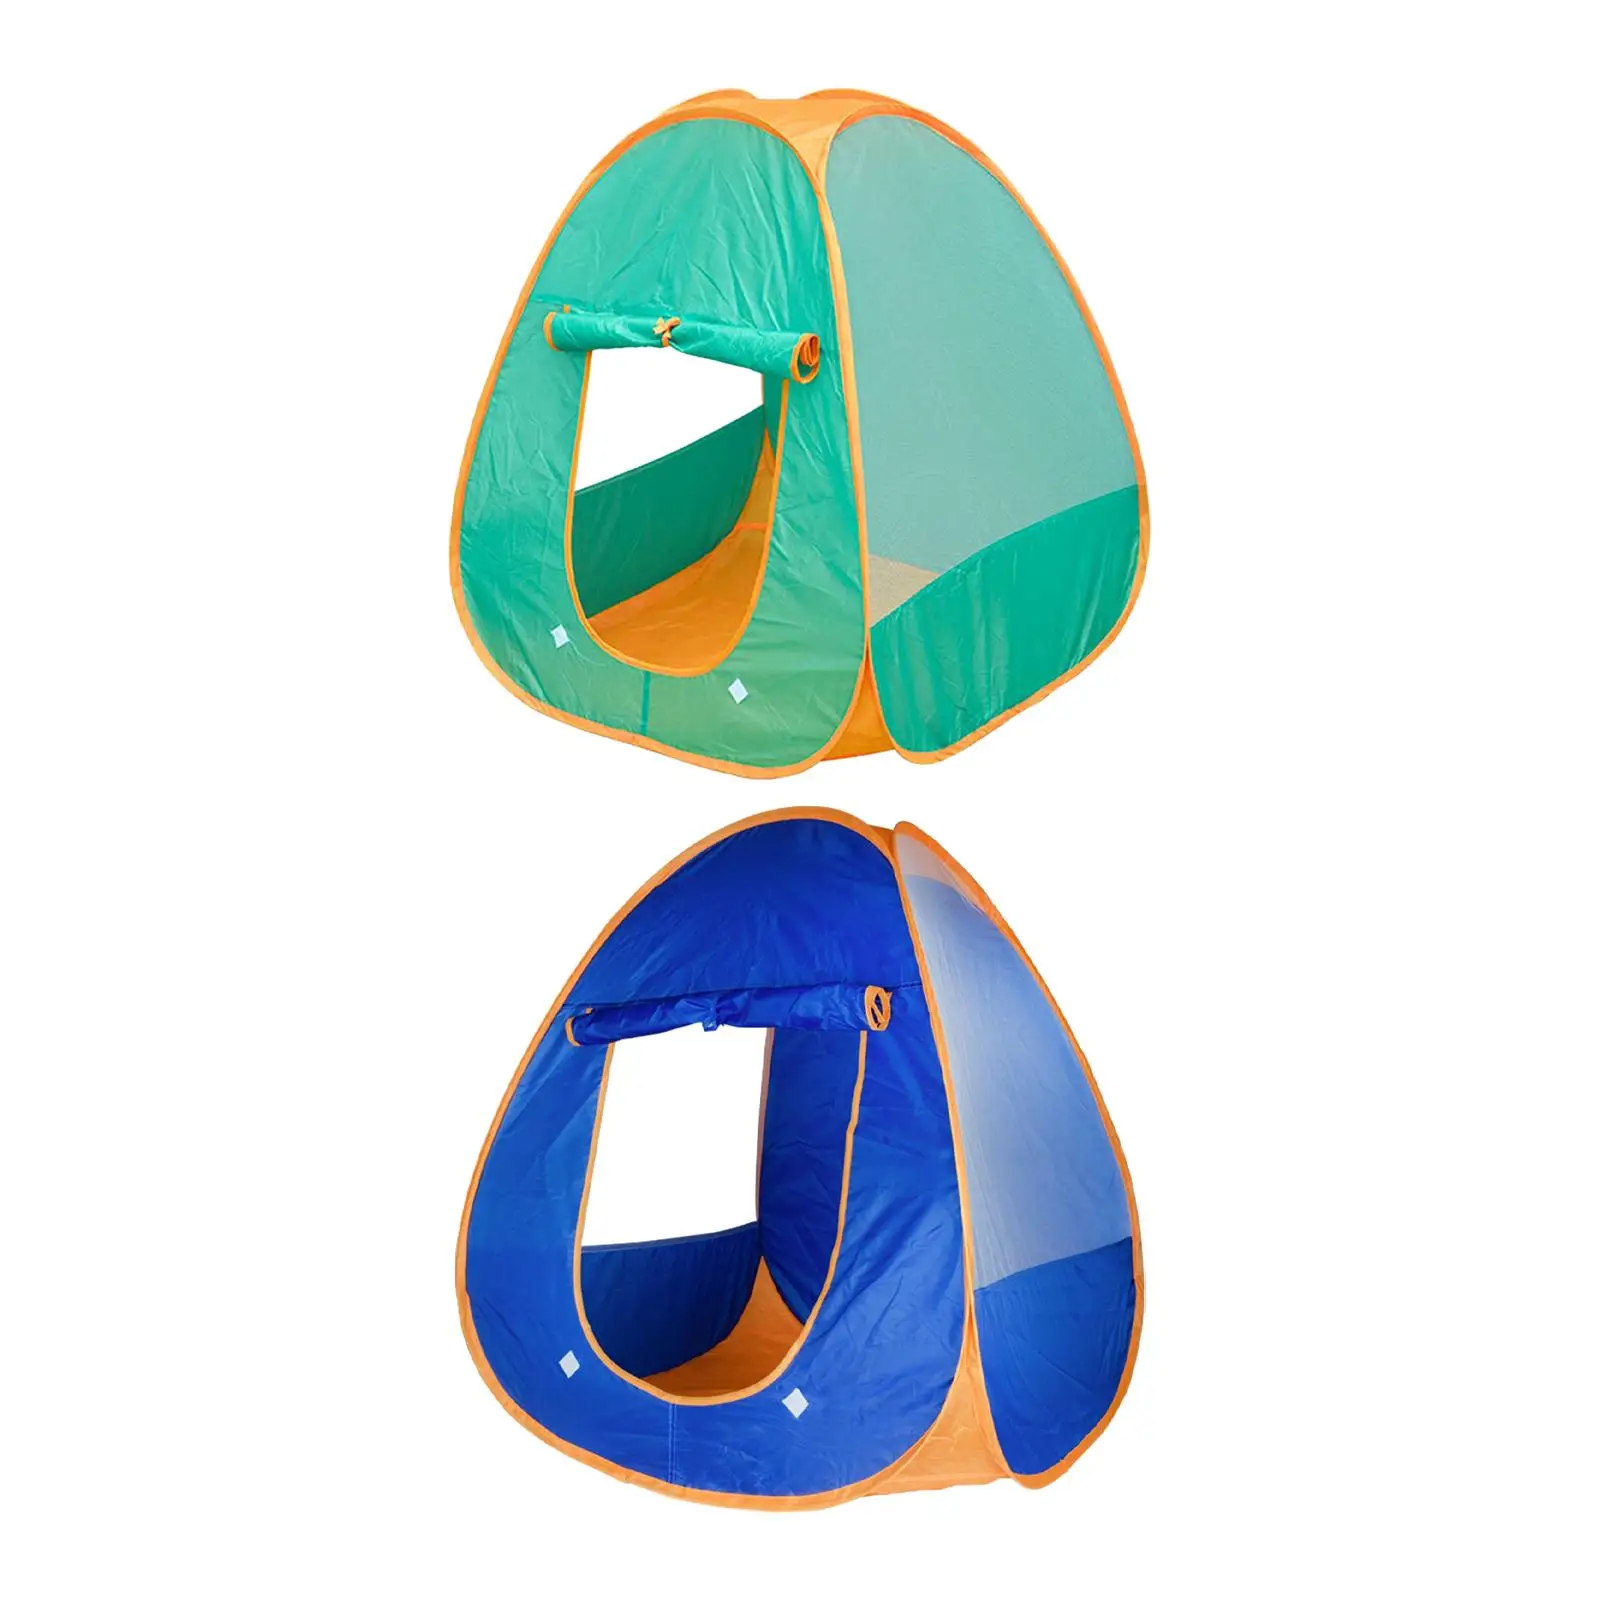 Children Play Tent Foldable Playhouse Toys for Indoor Outdoor Camping Home